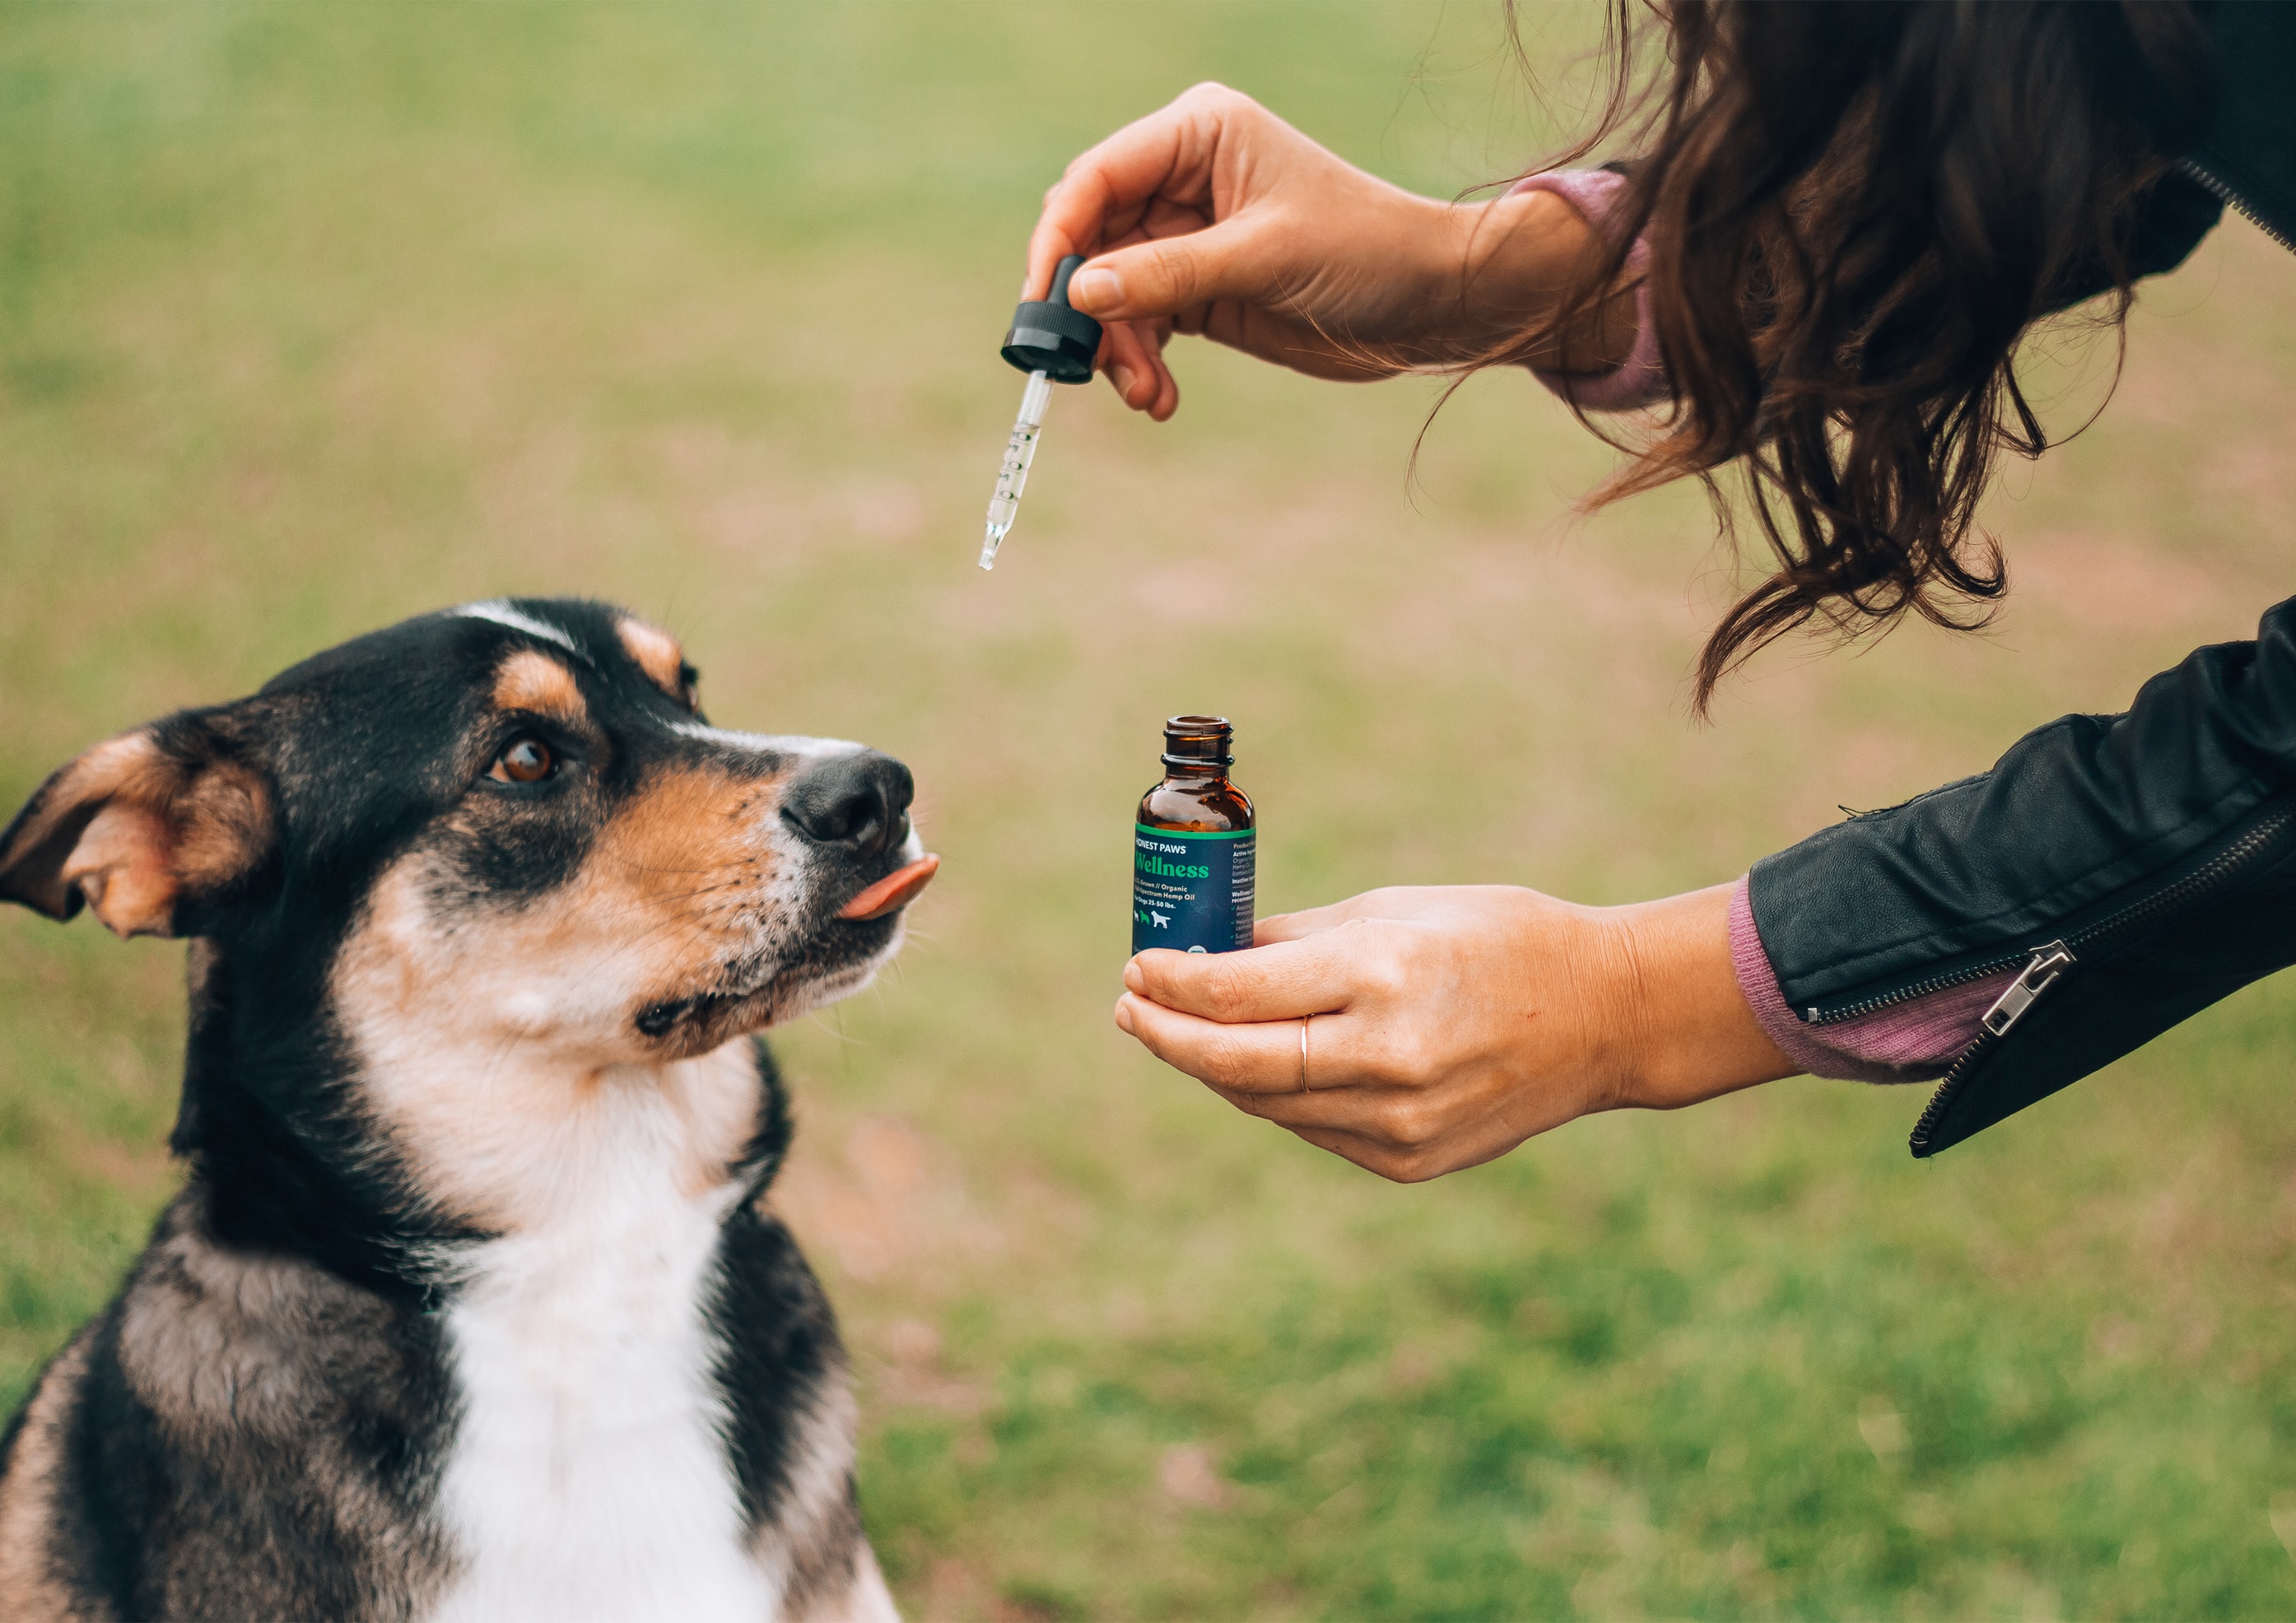 Owner giving cbd drops to the dog